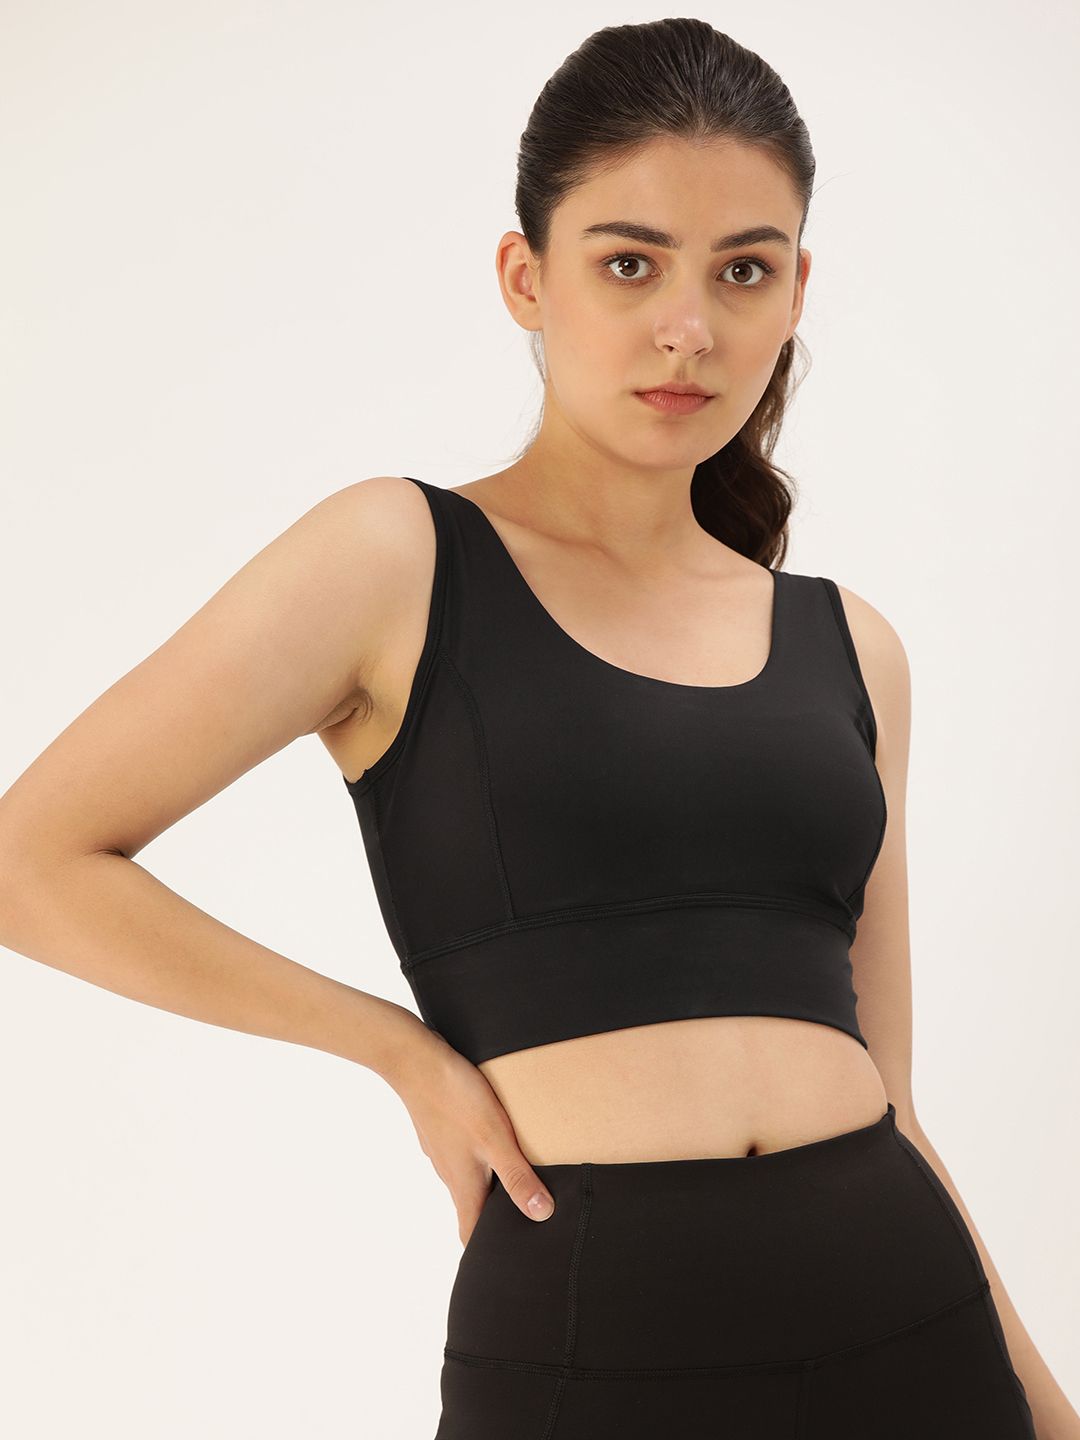 Enamor Athleisure Black Non-Wired Removable Padding Dry Fit Workout Bra EEATOE117JBKL Price in India